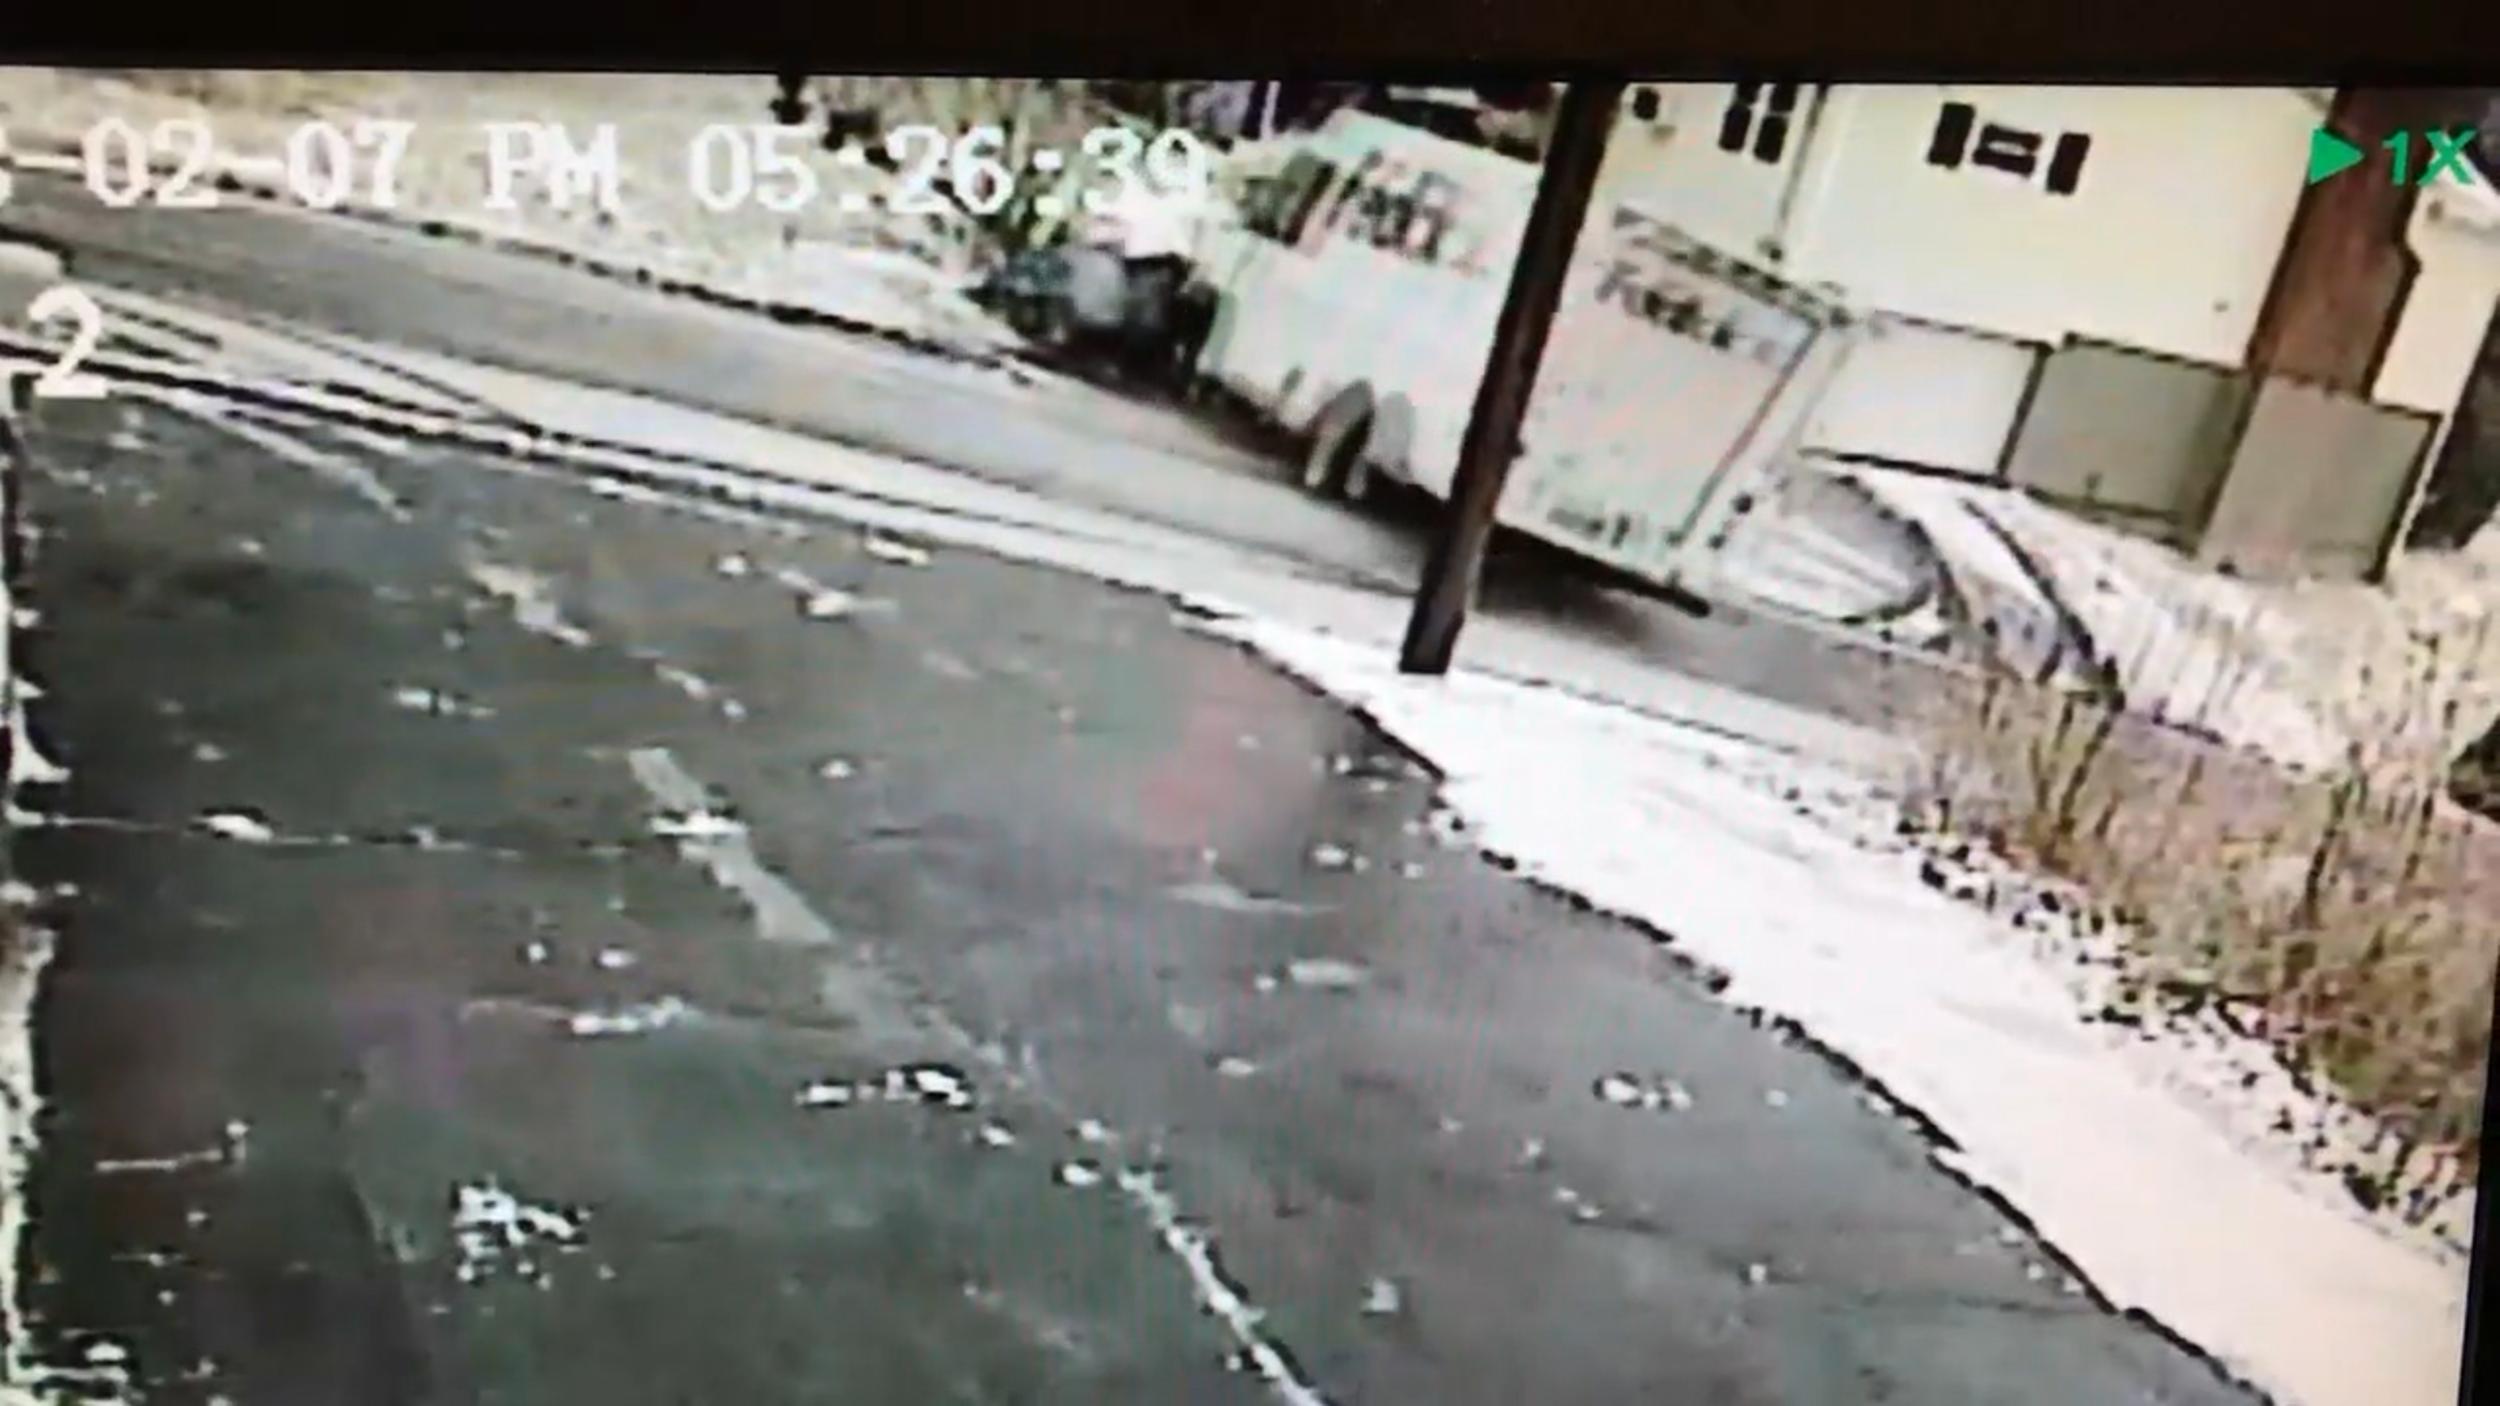 PHOTO: In a surveillance video obtained by ABC News a FedEx truck is seen spiraling out of control on a Connecticut street. 